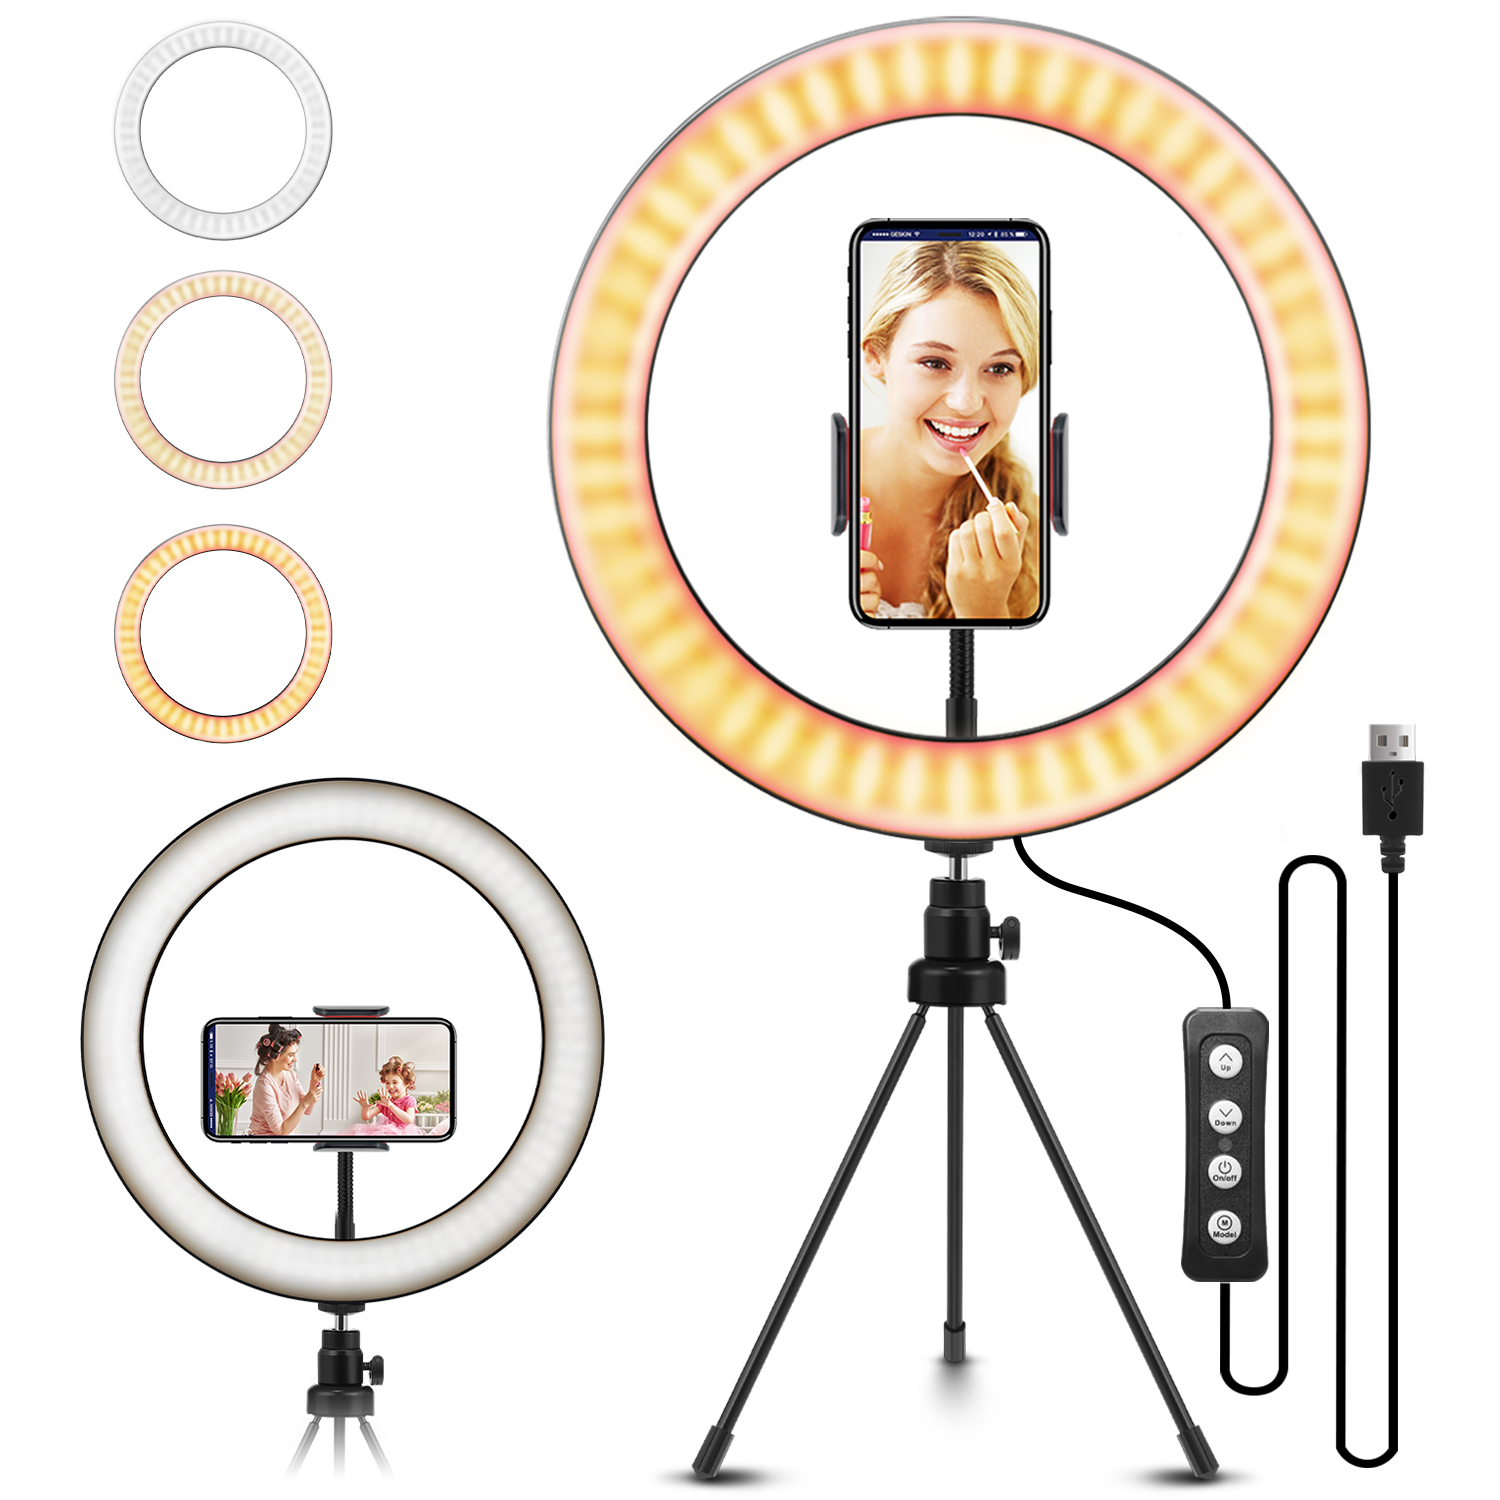 Dimmable Ring Light with Cell Phone Holder 3 Light Modes & 11 Brightness Level for YouTube Video Live Stream Desk Makeup Photography ELEGIANT 10.2 Selfie Ring Light with Tripod Stand 